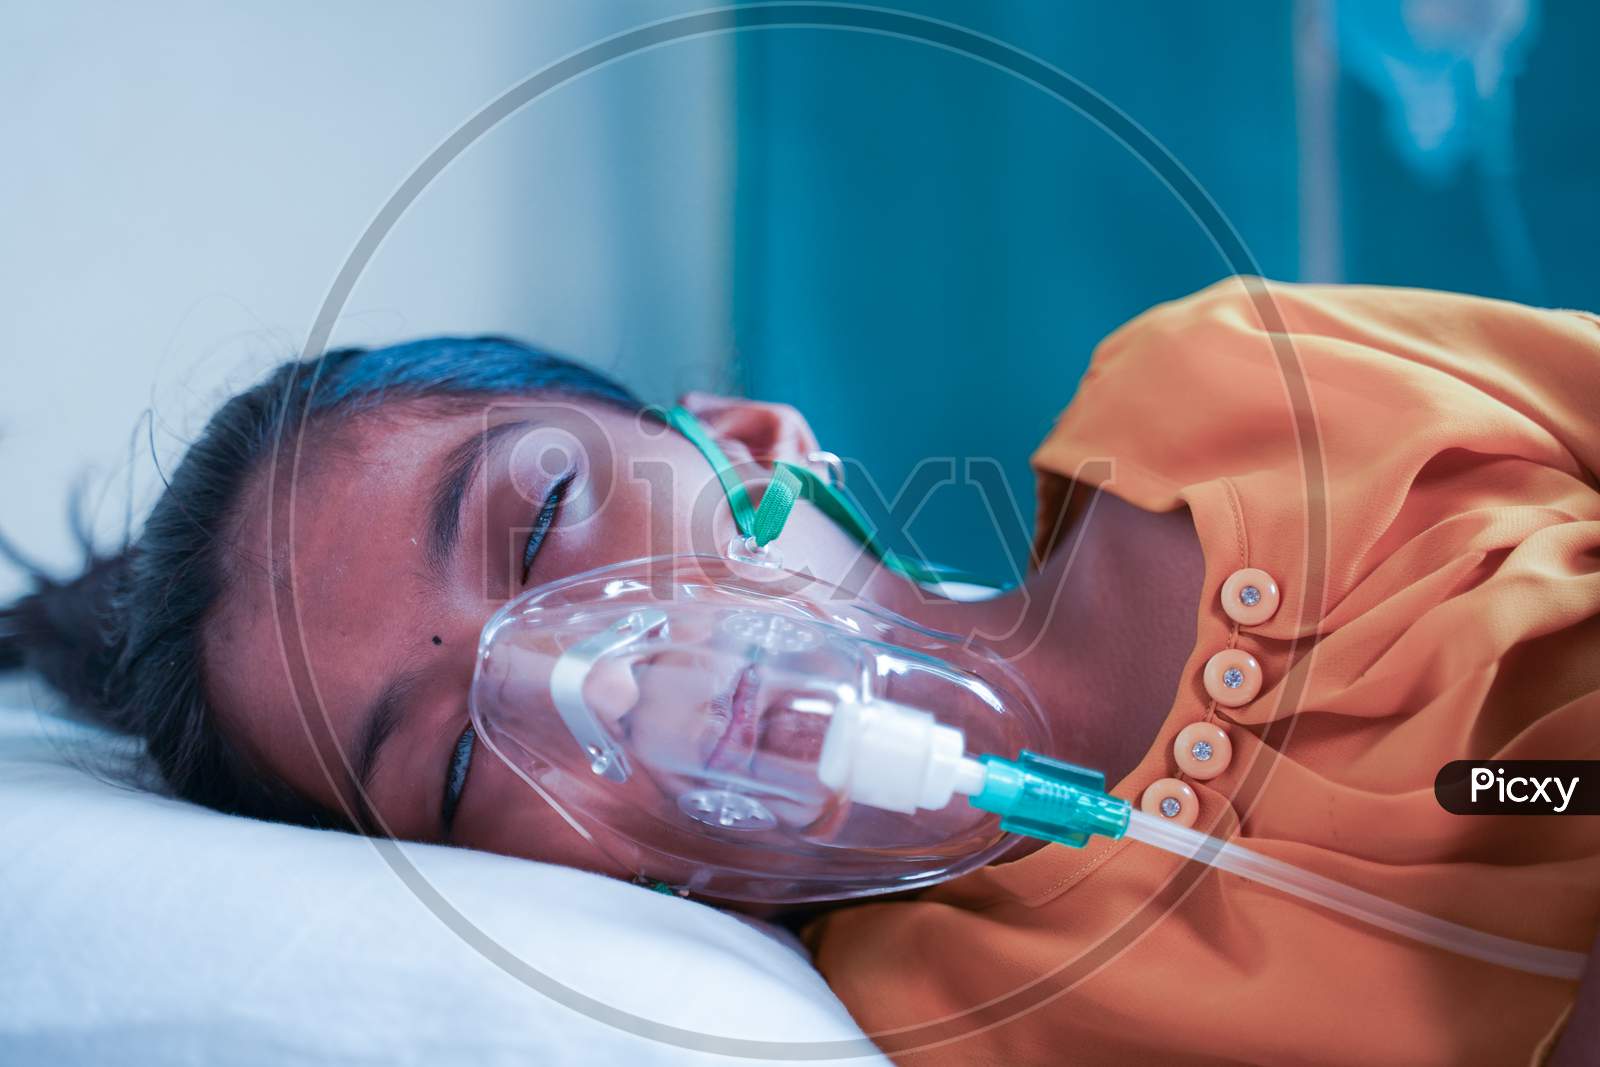 Little Girl Kid Breathing On Ventilator Oxygen Mask Due To Coronavirus Covid-19 Breathing Shortness Or Dyspnea Infection - Concept Of Children Healthcare And Medical During Third Wave Pandemic Outbreak